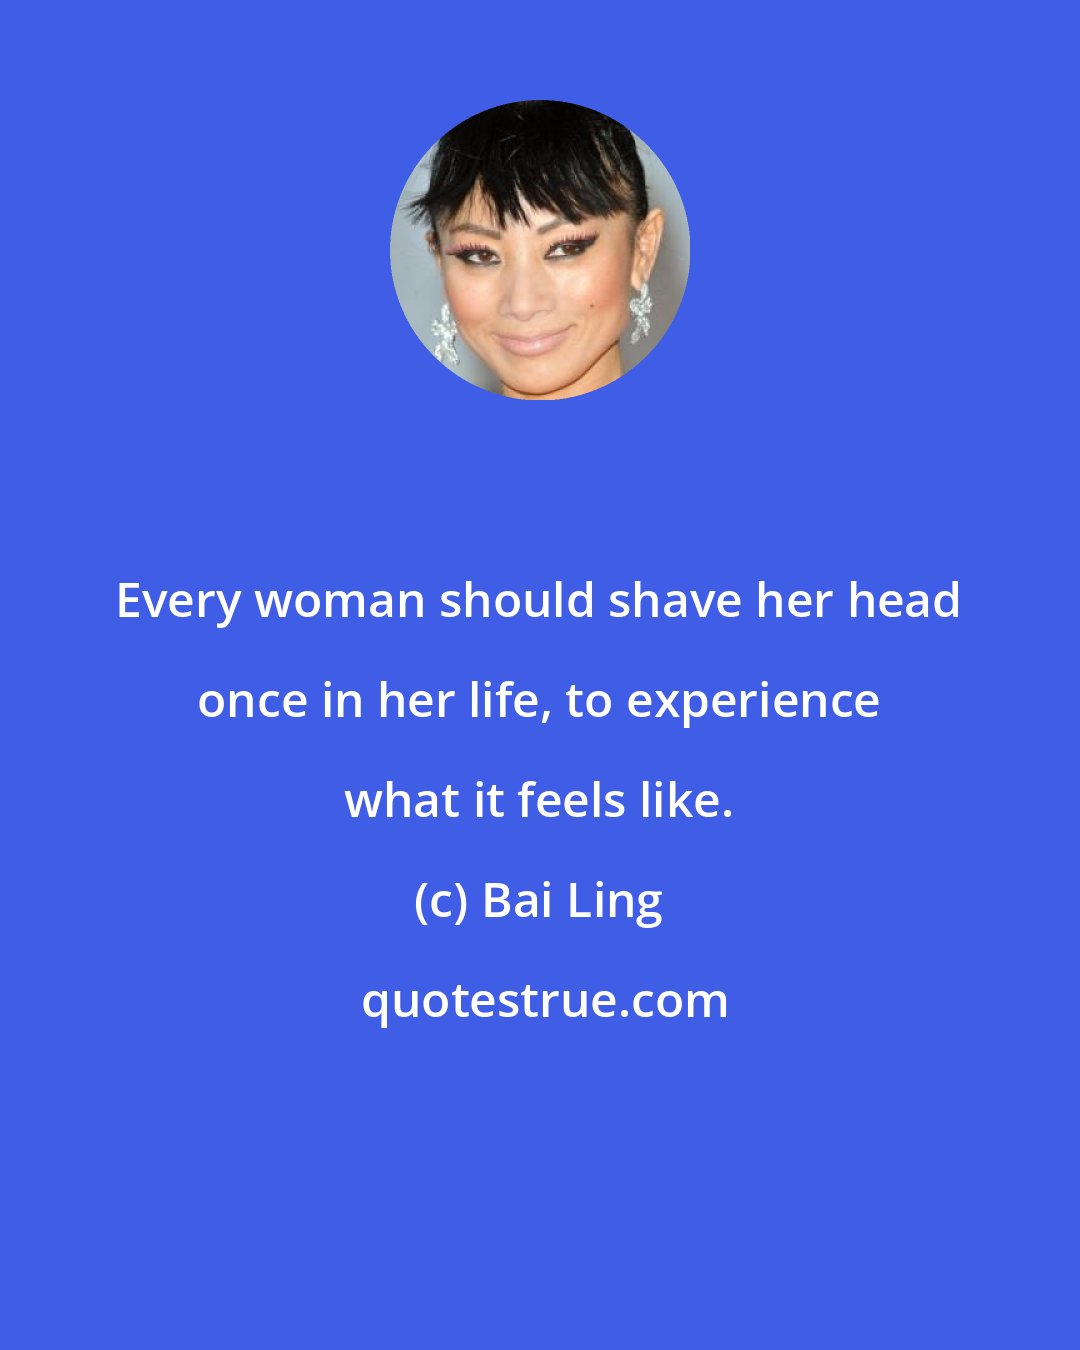 Bai Ling: Every woman should shave her head once in her life, to experience what it feels like.